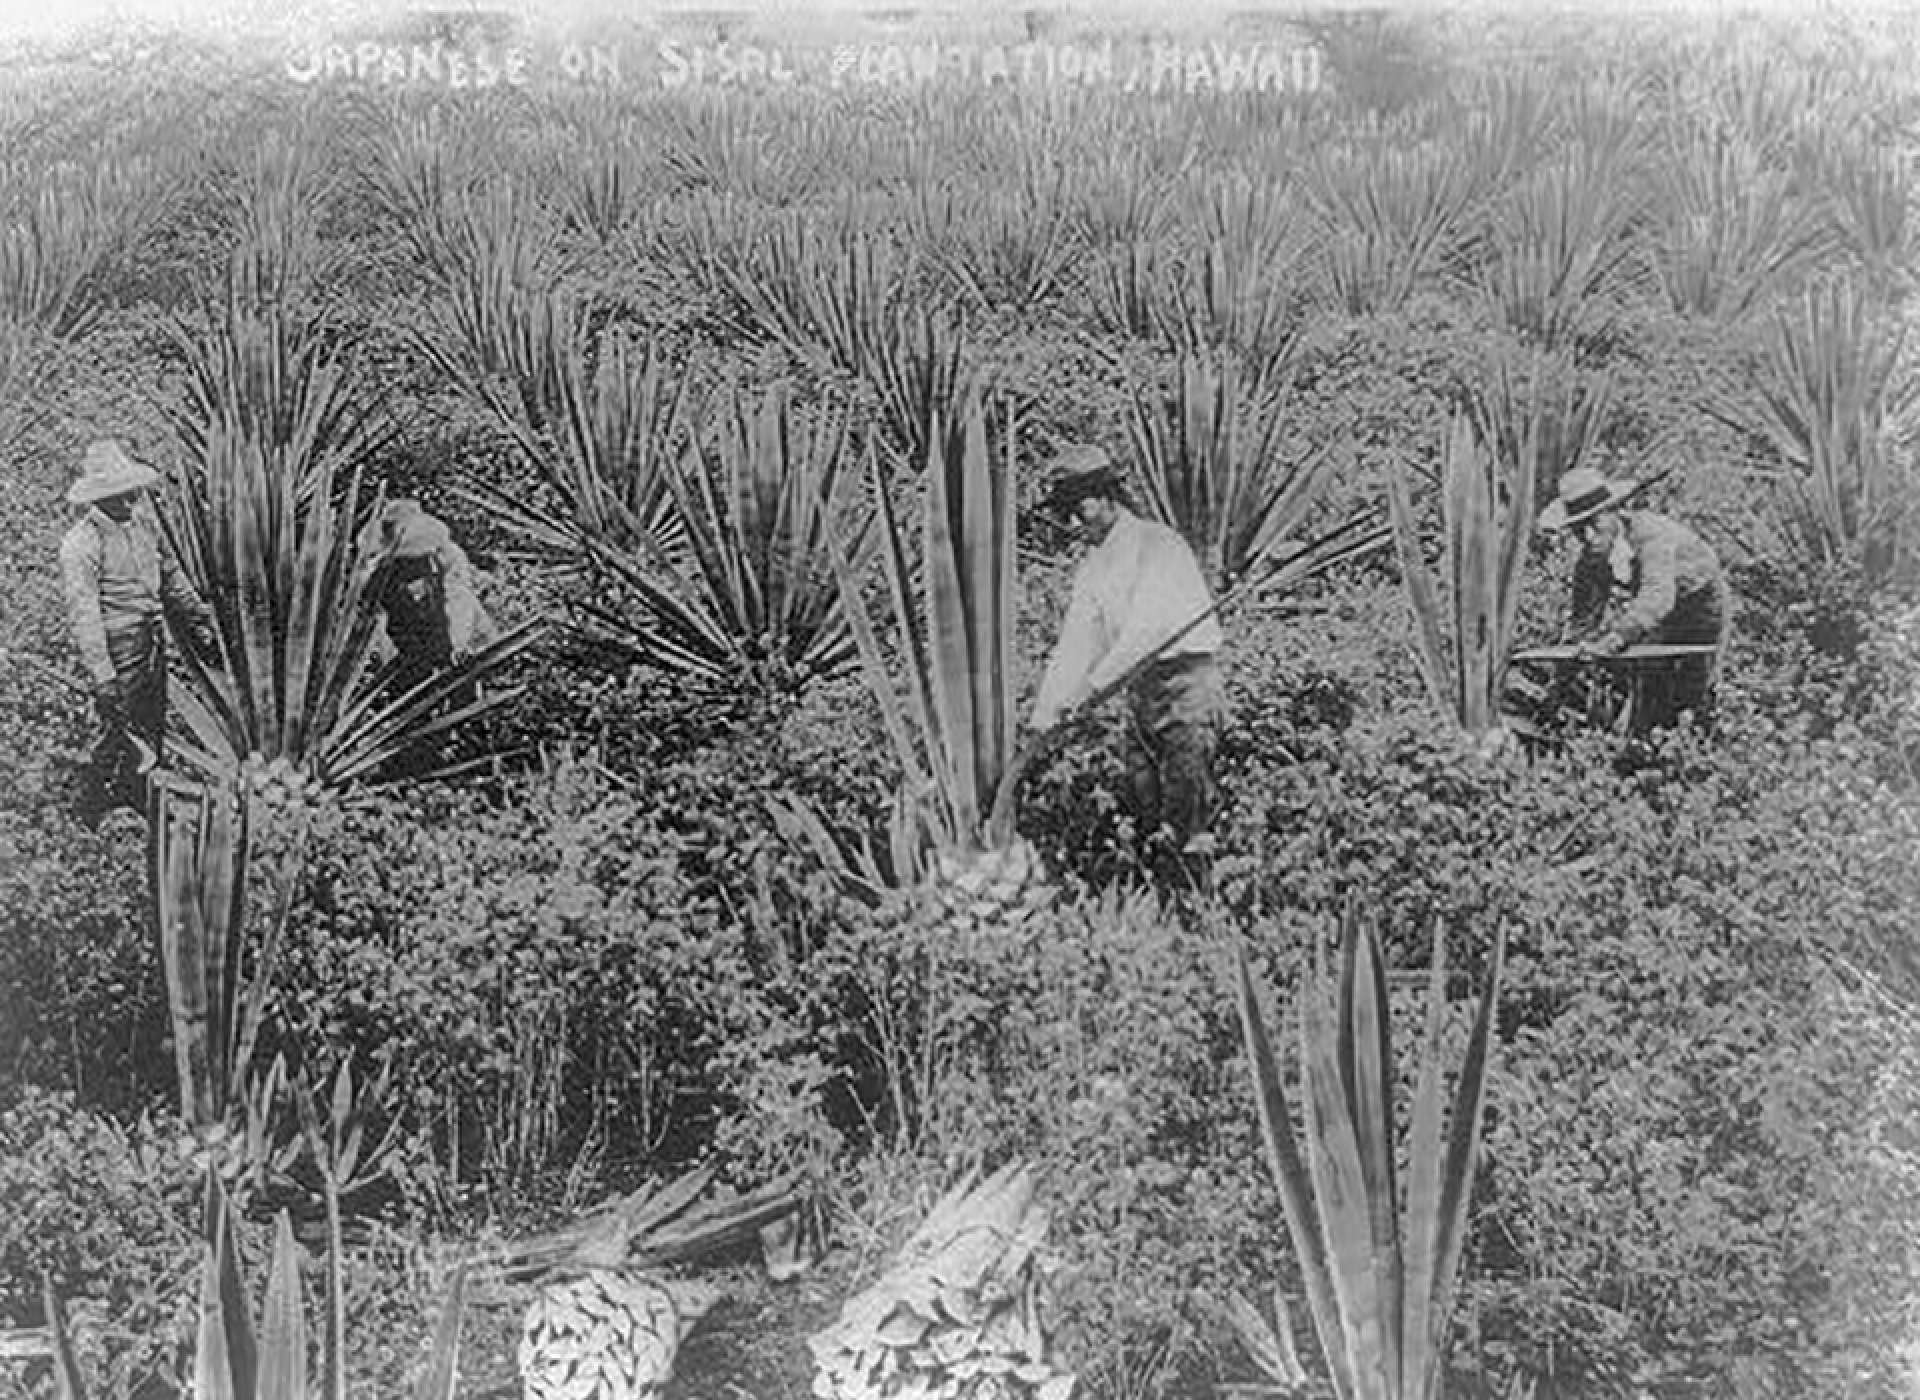 Japanese on Sisal Plantation in Hawaii, c. 1910. Courtesy of the Library of Congress.